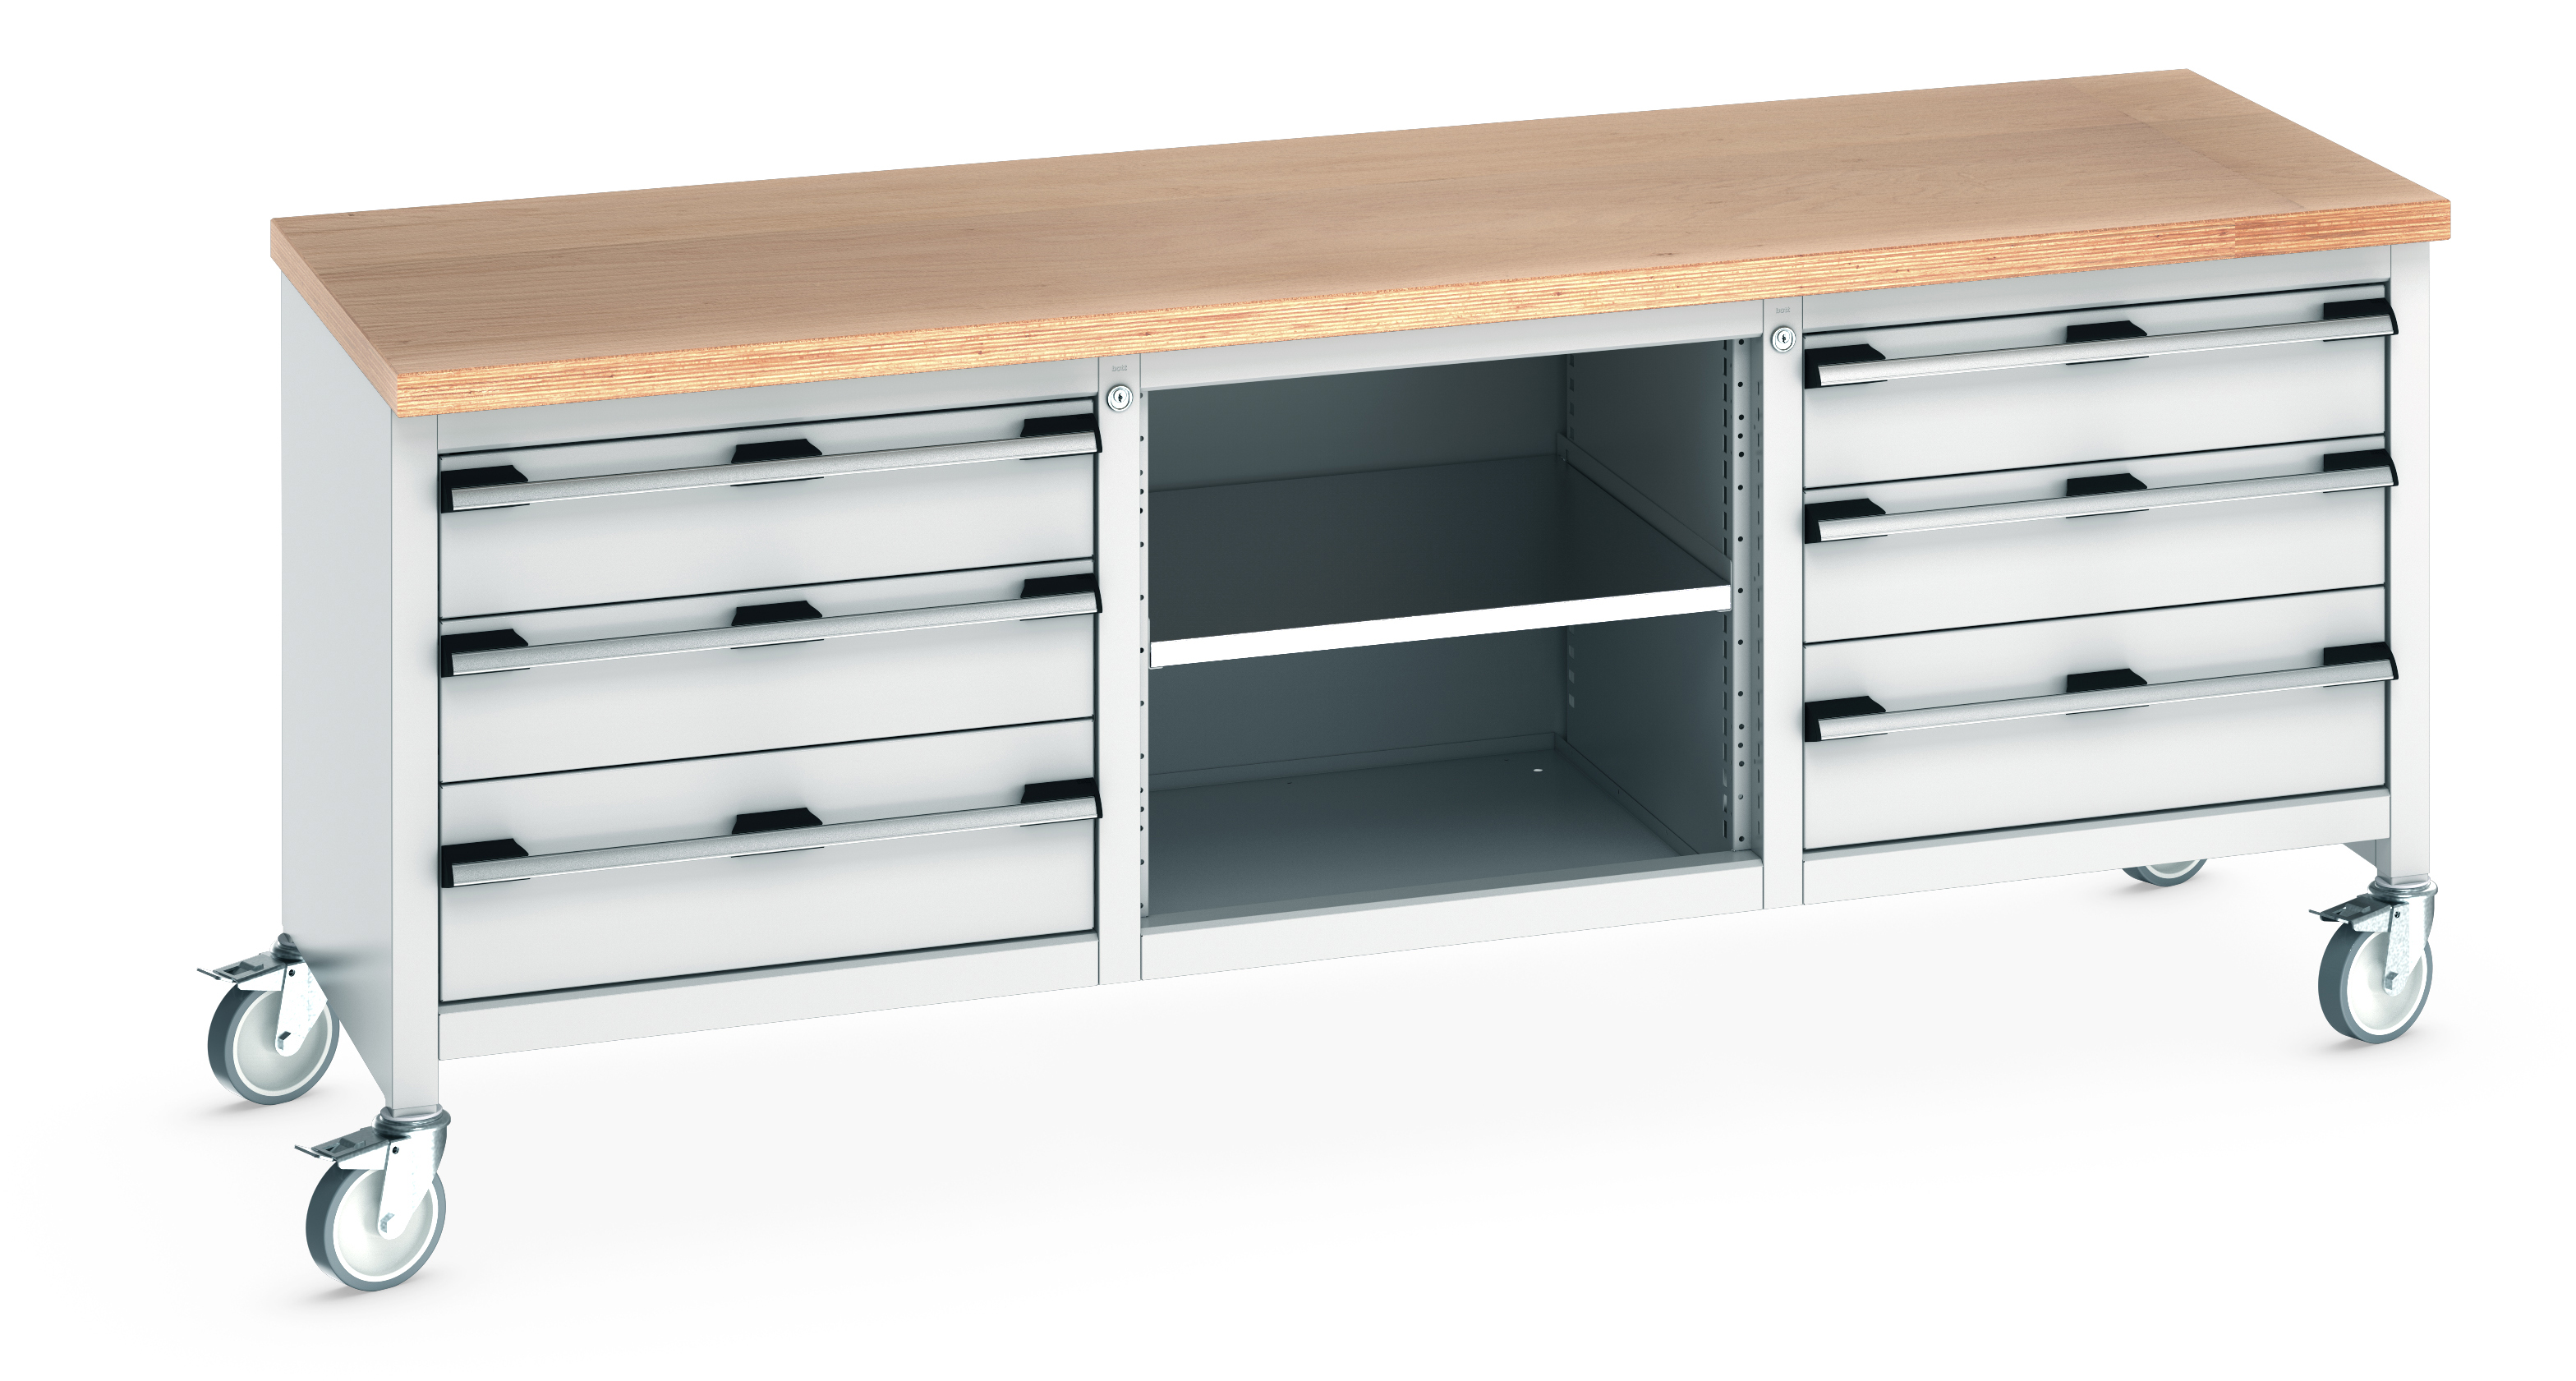 Bott Cubio Mobile Storage Bench With 3 Drawer Cabinet / Open Cupboard / 3 Drawer Cabinet - 41002130.16V